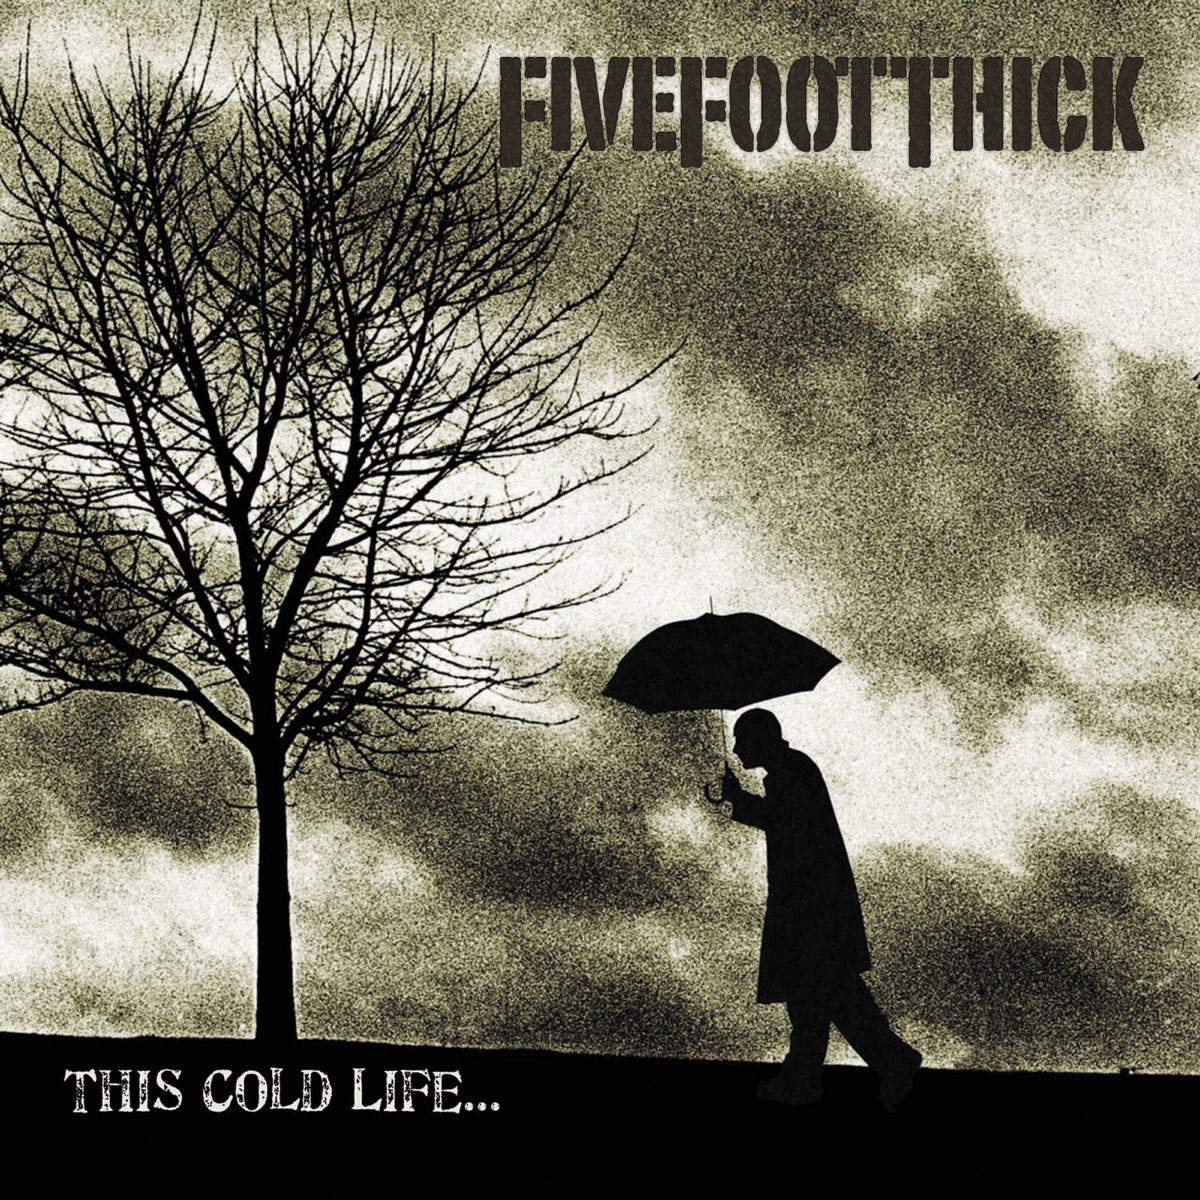 Life is cold. Five Life. Five foot thick. Five foot thick Band. Cold as Life.